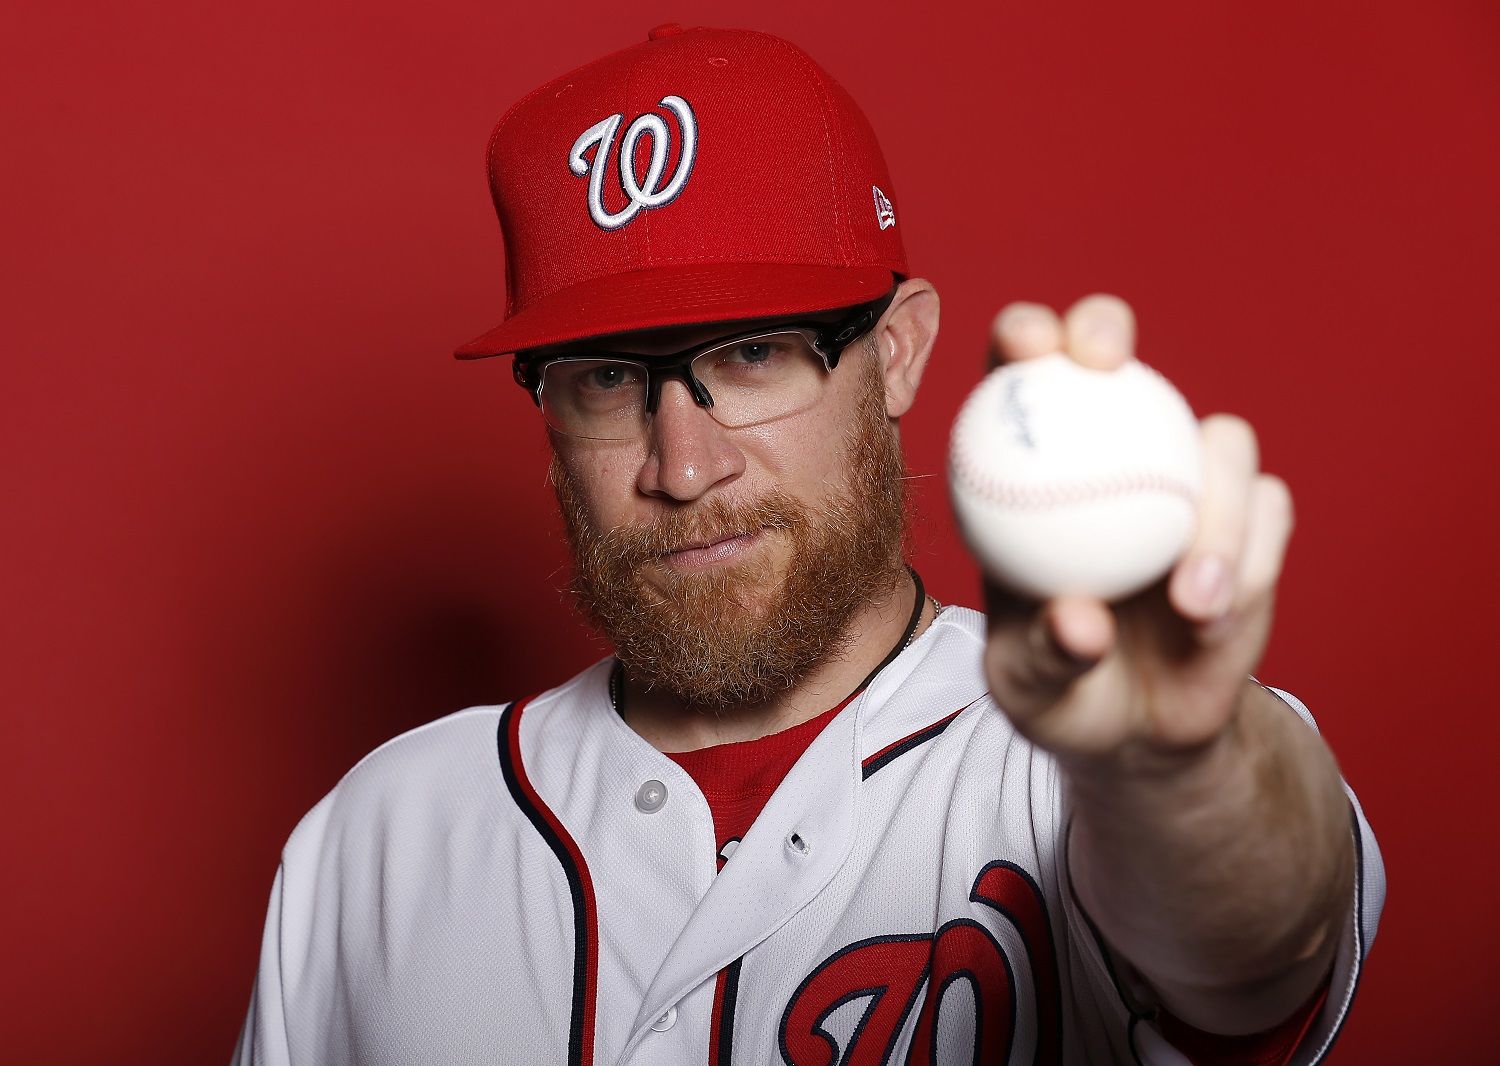 WEST PALM BEACH, FLORIDA - FEBRUARY 22:  Sean Doolittle #62 of the Washington Nationals poses for a portrait on Photo Day at FITTEAM Ballpark of The Palm Beaches during on February 22, 2019 in West Palm Beach, Florida. (Photo by Michael Reaves/Getty Images)